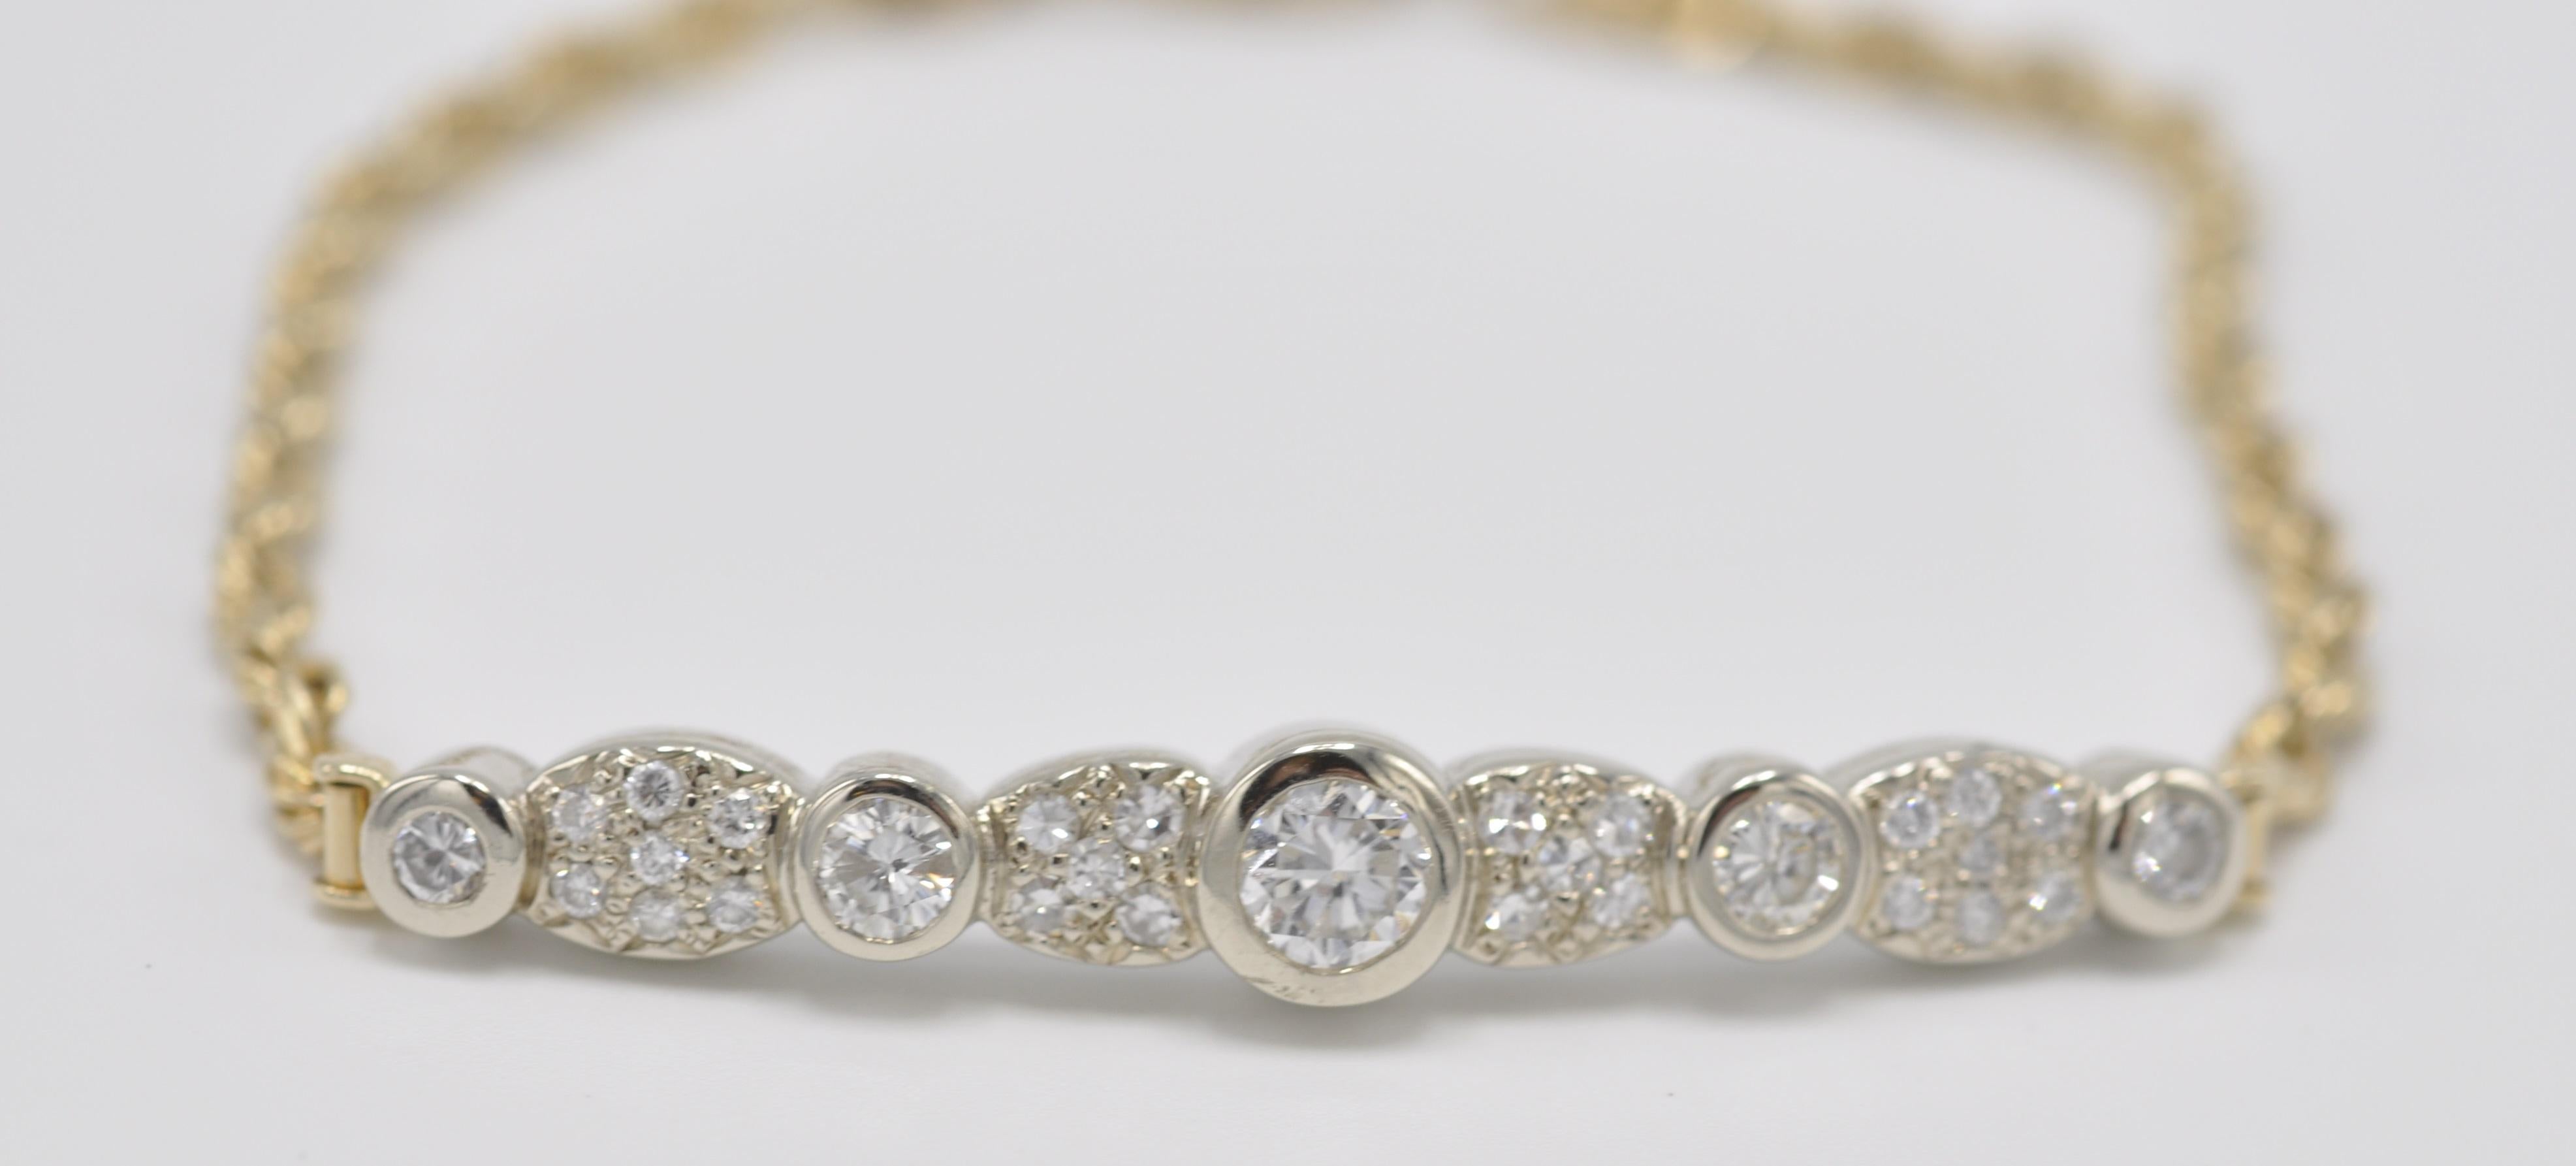 14k Yellow and White Gold Combination, Custom Designed Vintage Bracelet with 1.25ctw Round Diamonds. The diamonds are H in color and SI in clarity. thereby adding to the luster and sparkle of this piece. The bracelet is 7.75 inches long but could be